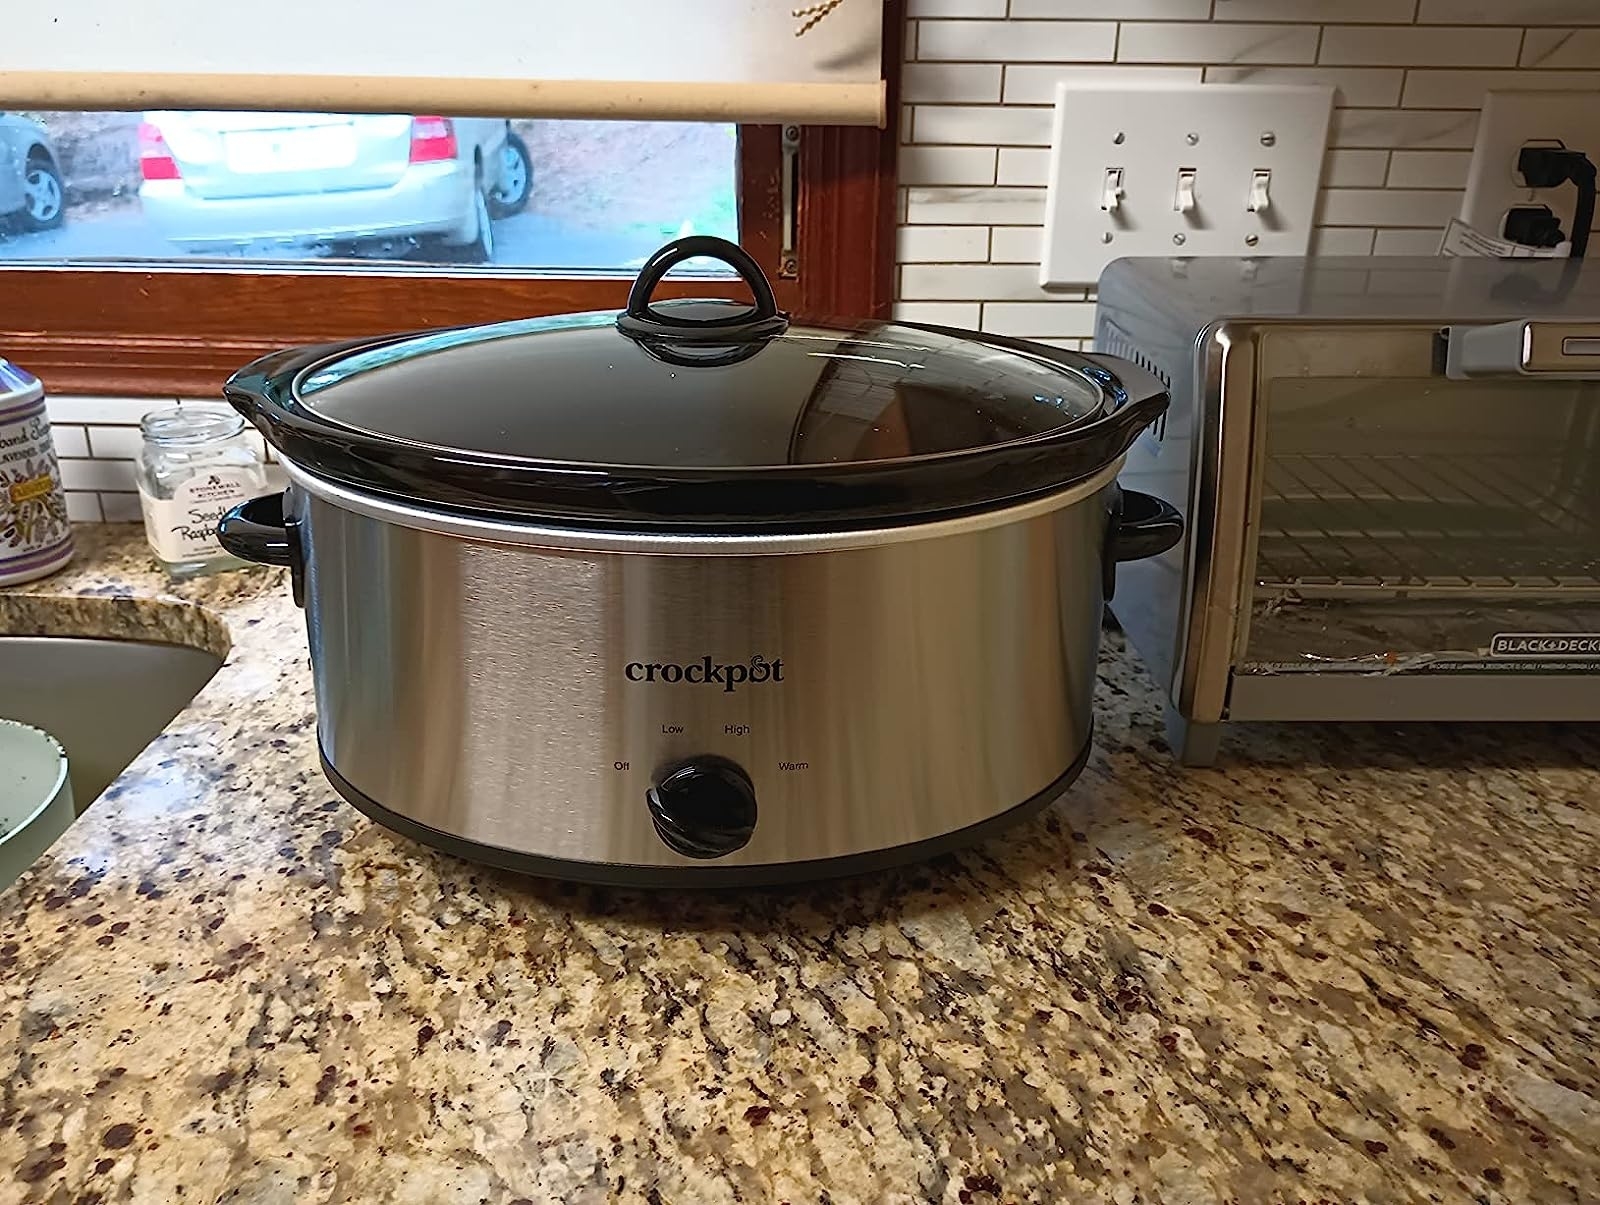 Reviewer image of the crock pot on their countertop